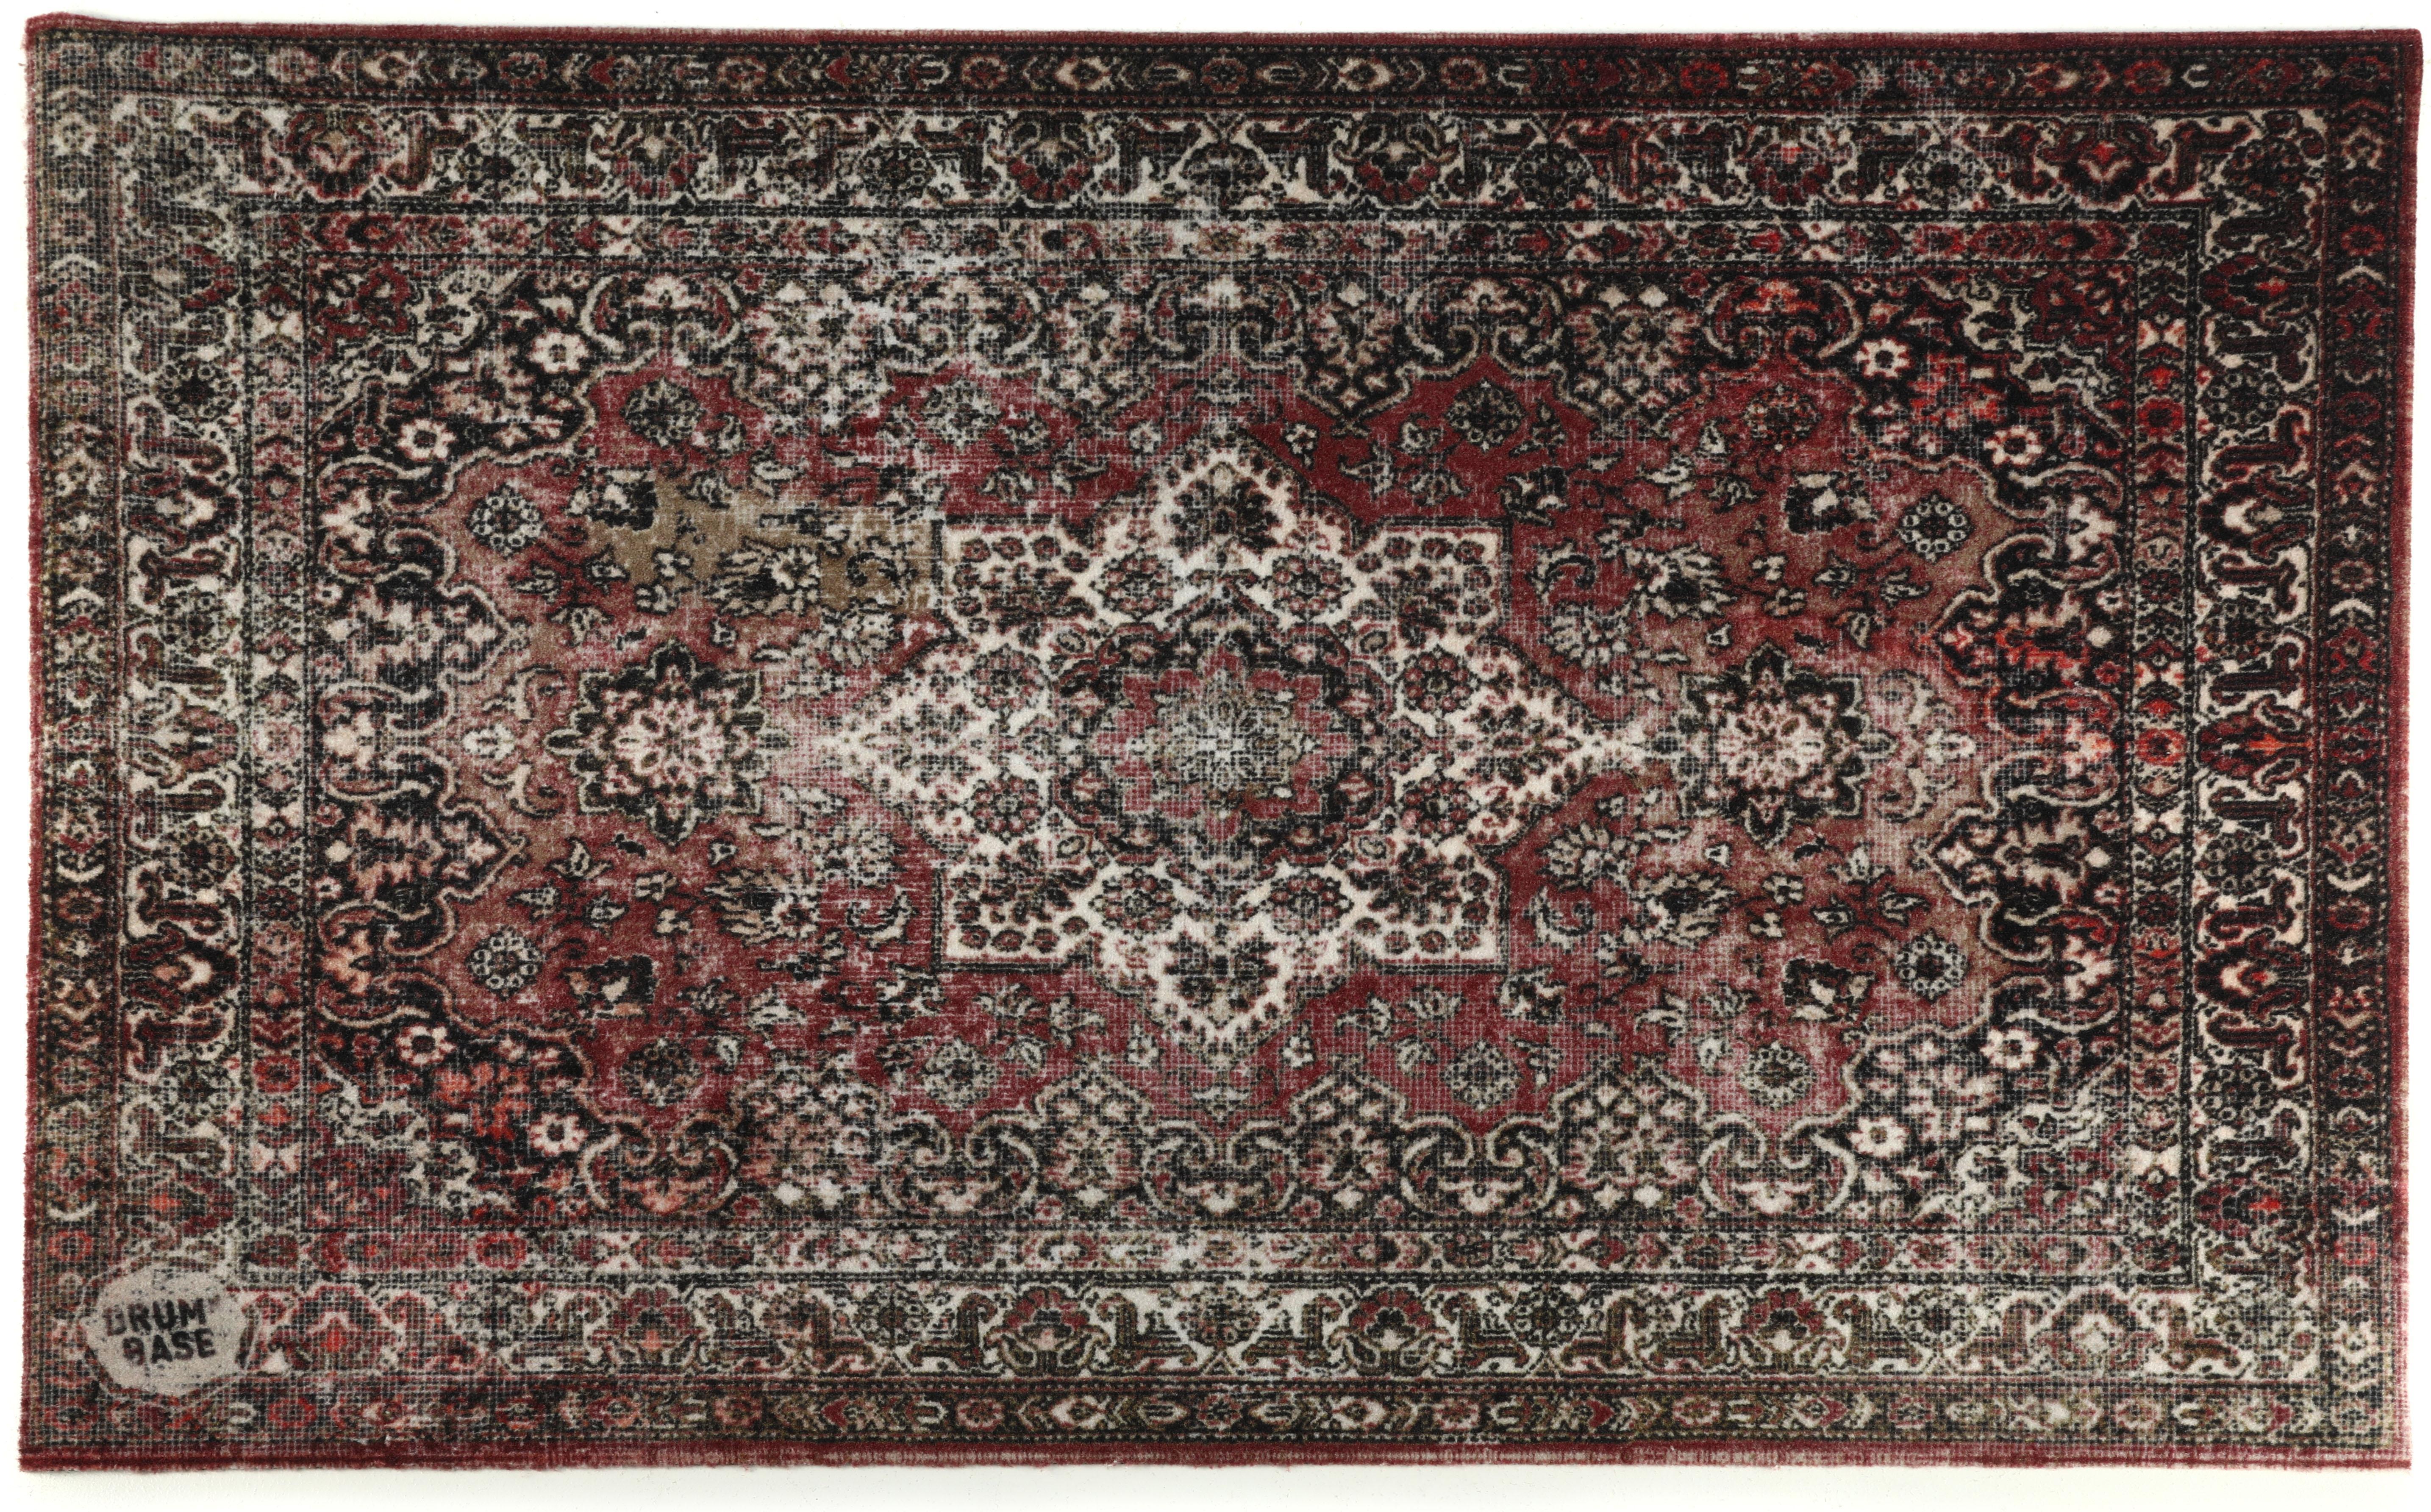 carpet persian car mats, carpet persian car mats Suppliers and  Manufacturers at